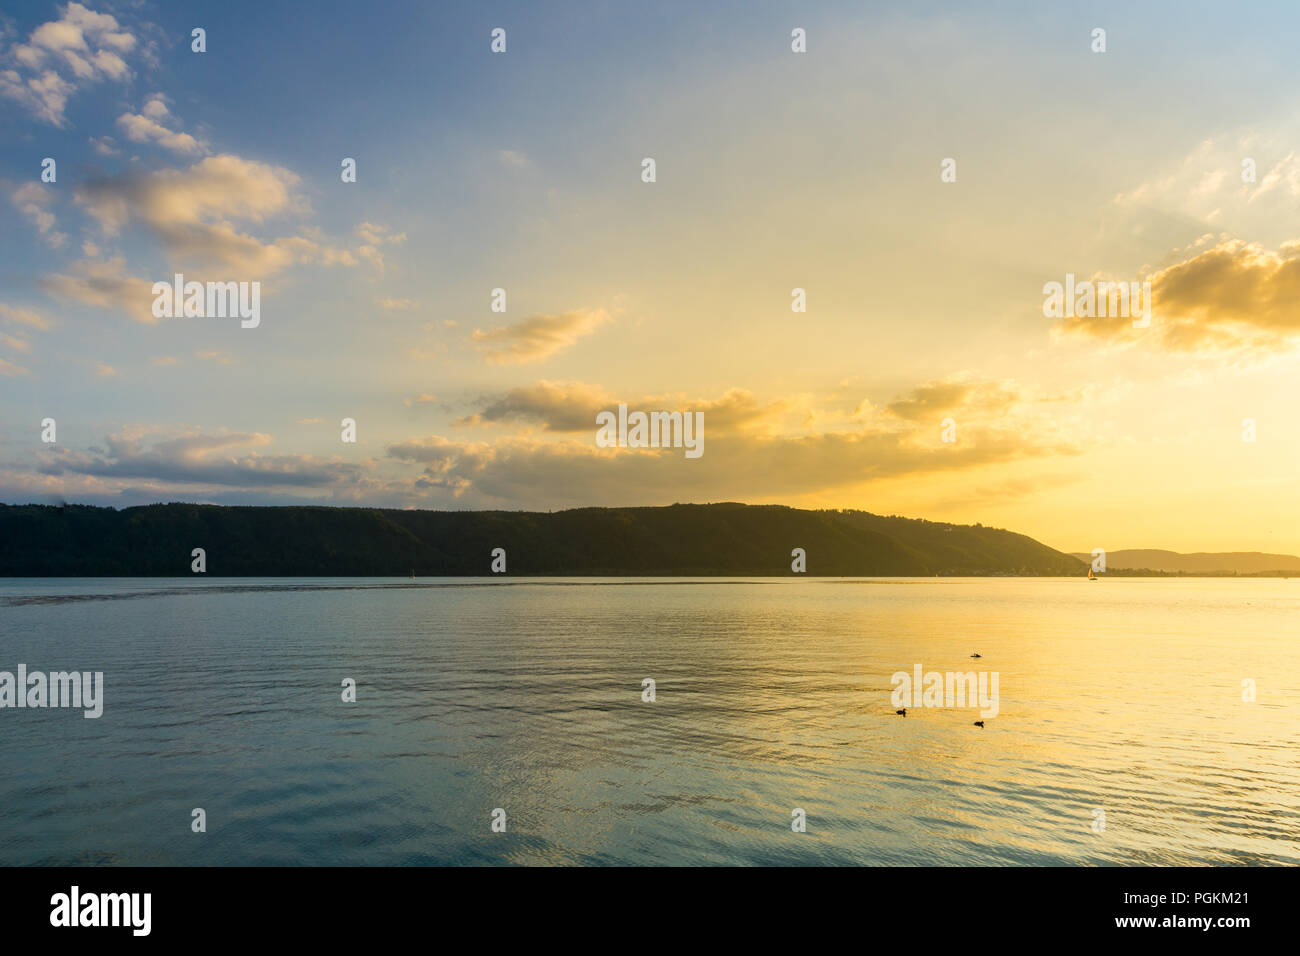 Germany, Silent water of lake constance in evening twilight mood Stock Photo